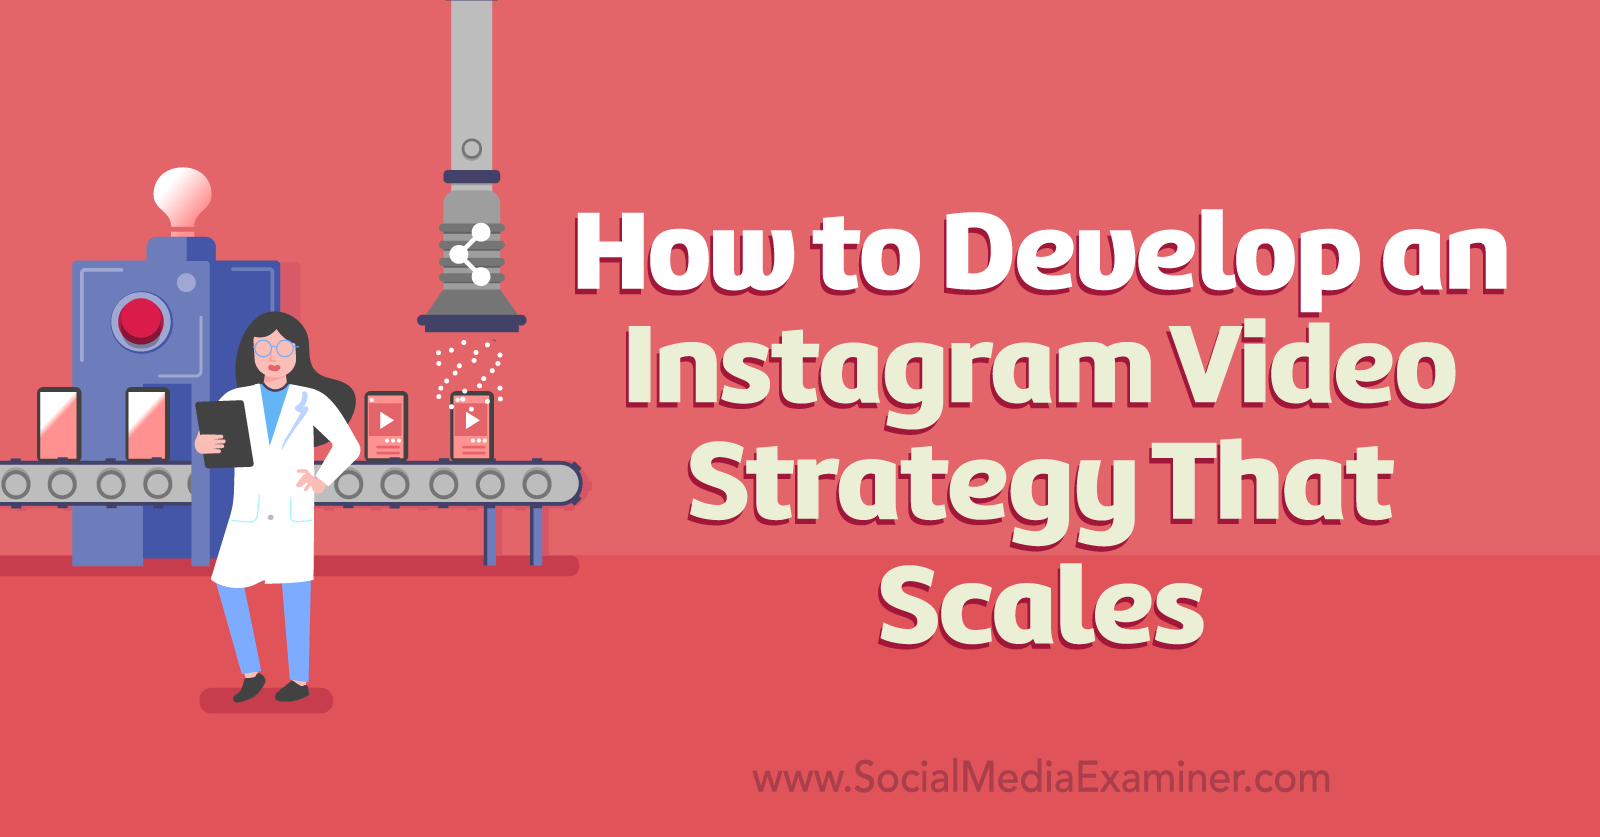 How to Develop an Instagram Video Strategy That Scales by Social Media Examiner